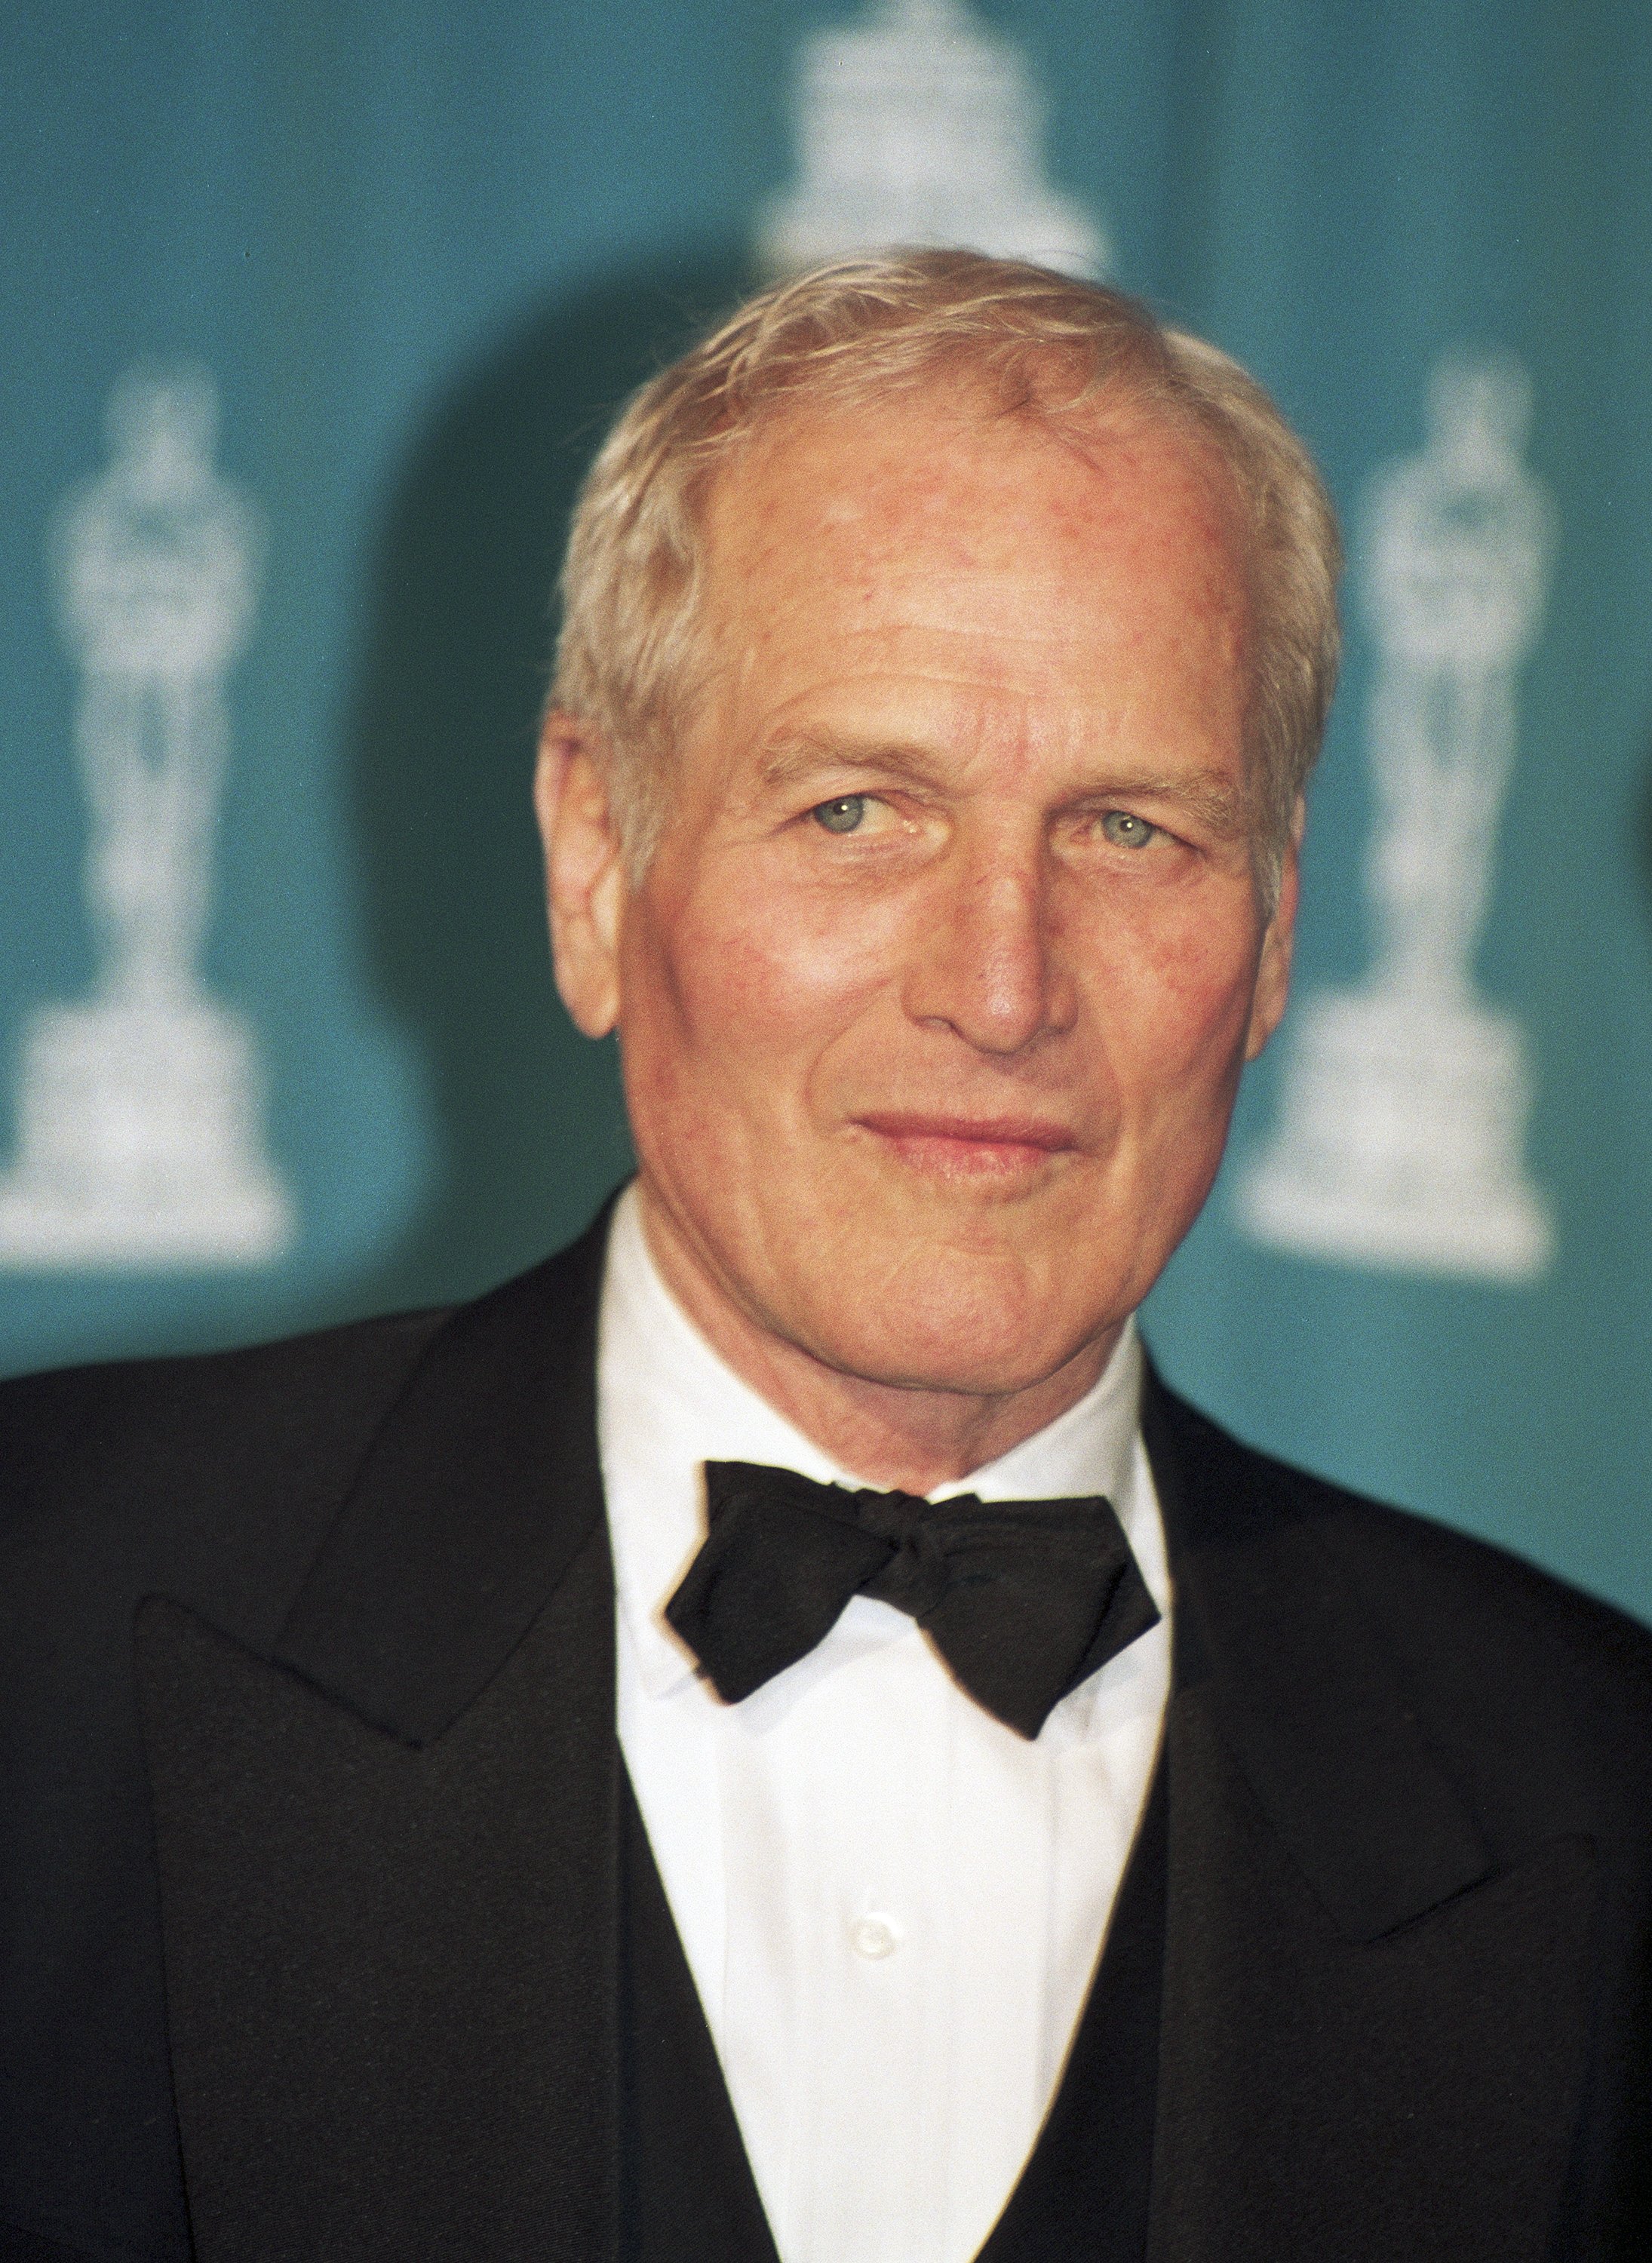 Paul Newman at the Shrine Auditorium during the 67th Annual Academy Awards on March 27,1995 in Los Angeles, California. / Source: Getty Images